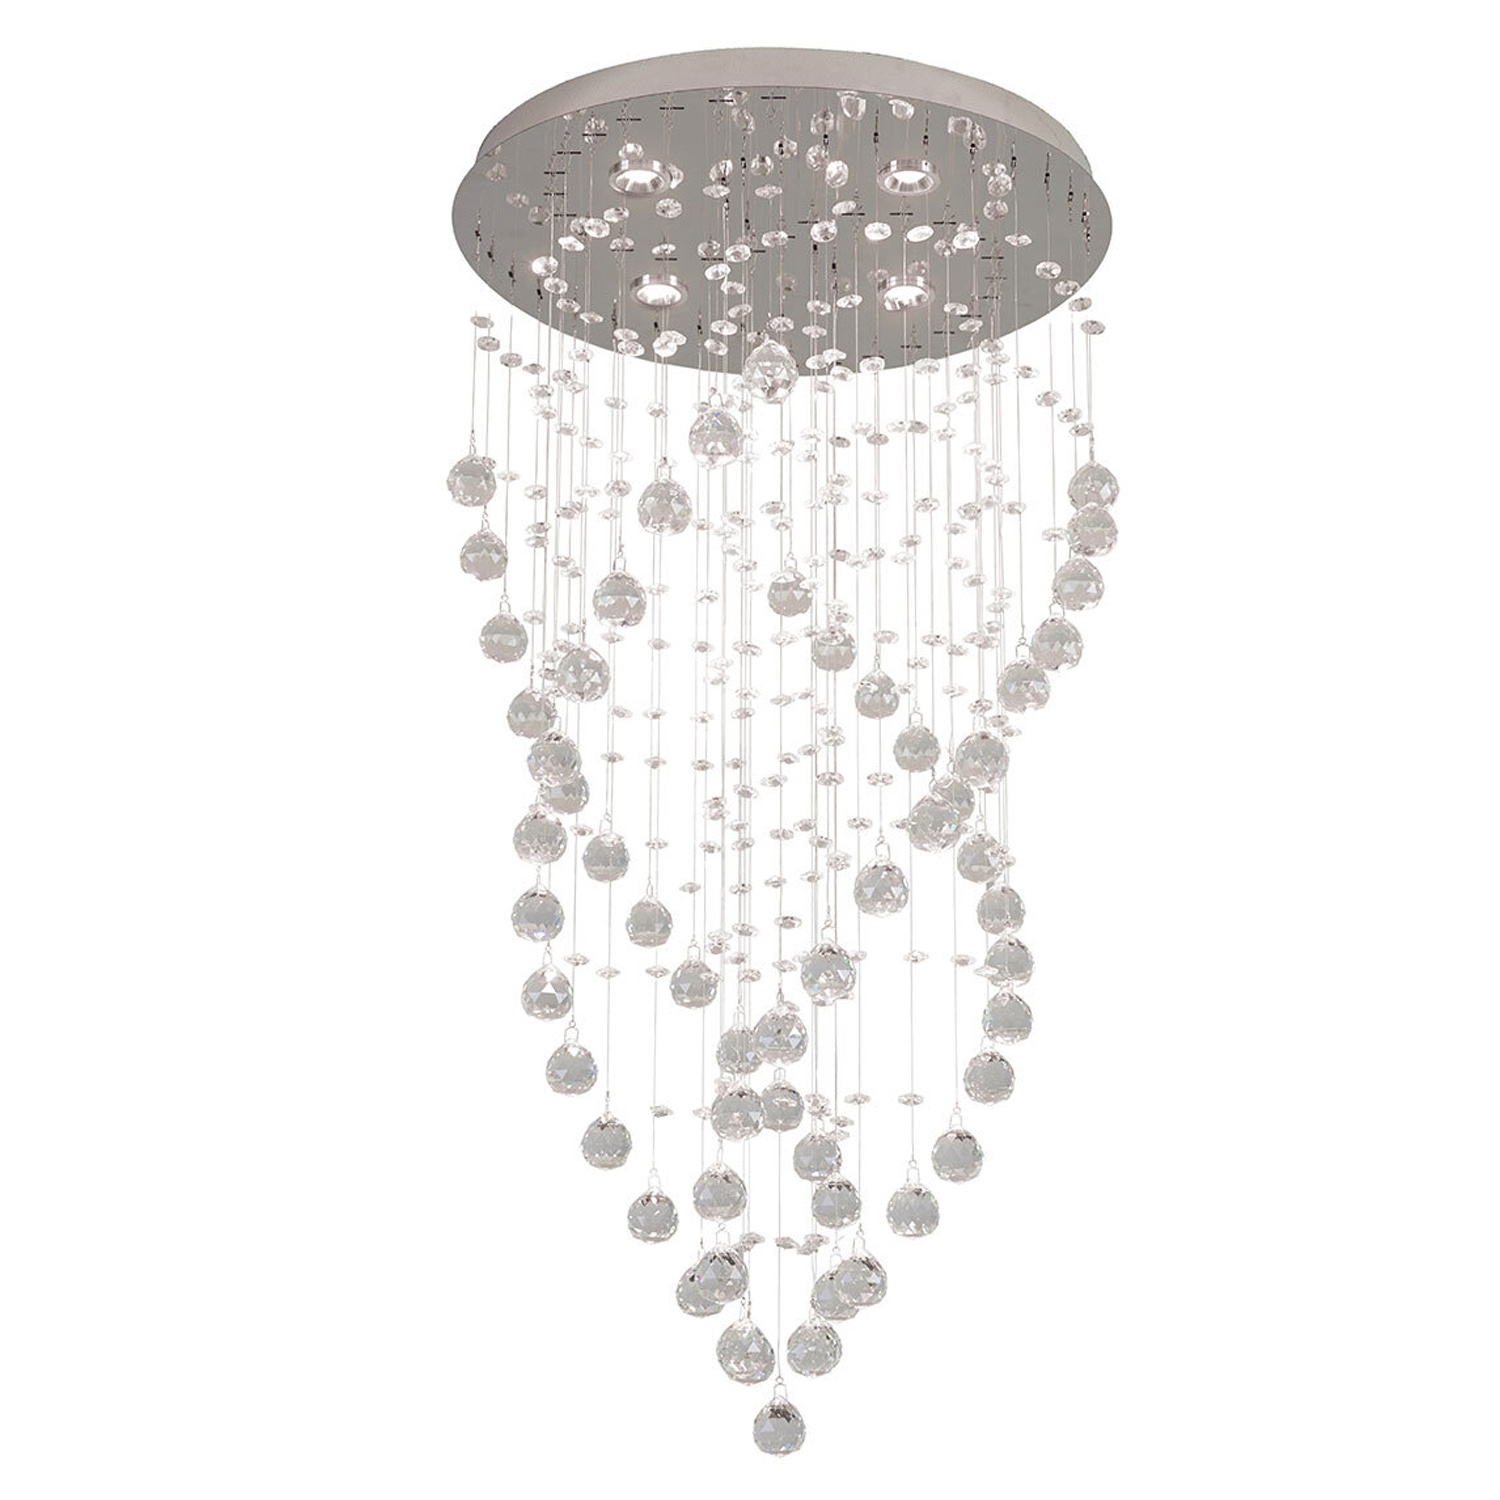 Razzle 78cm LED Droplet Ceiling Fitting Image 1